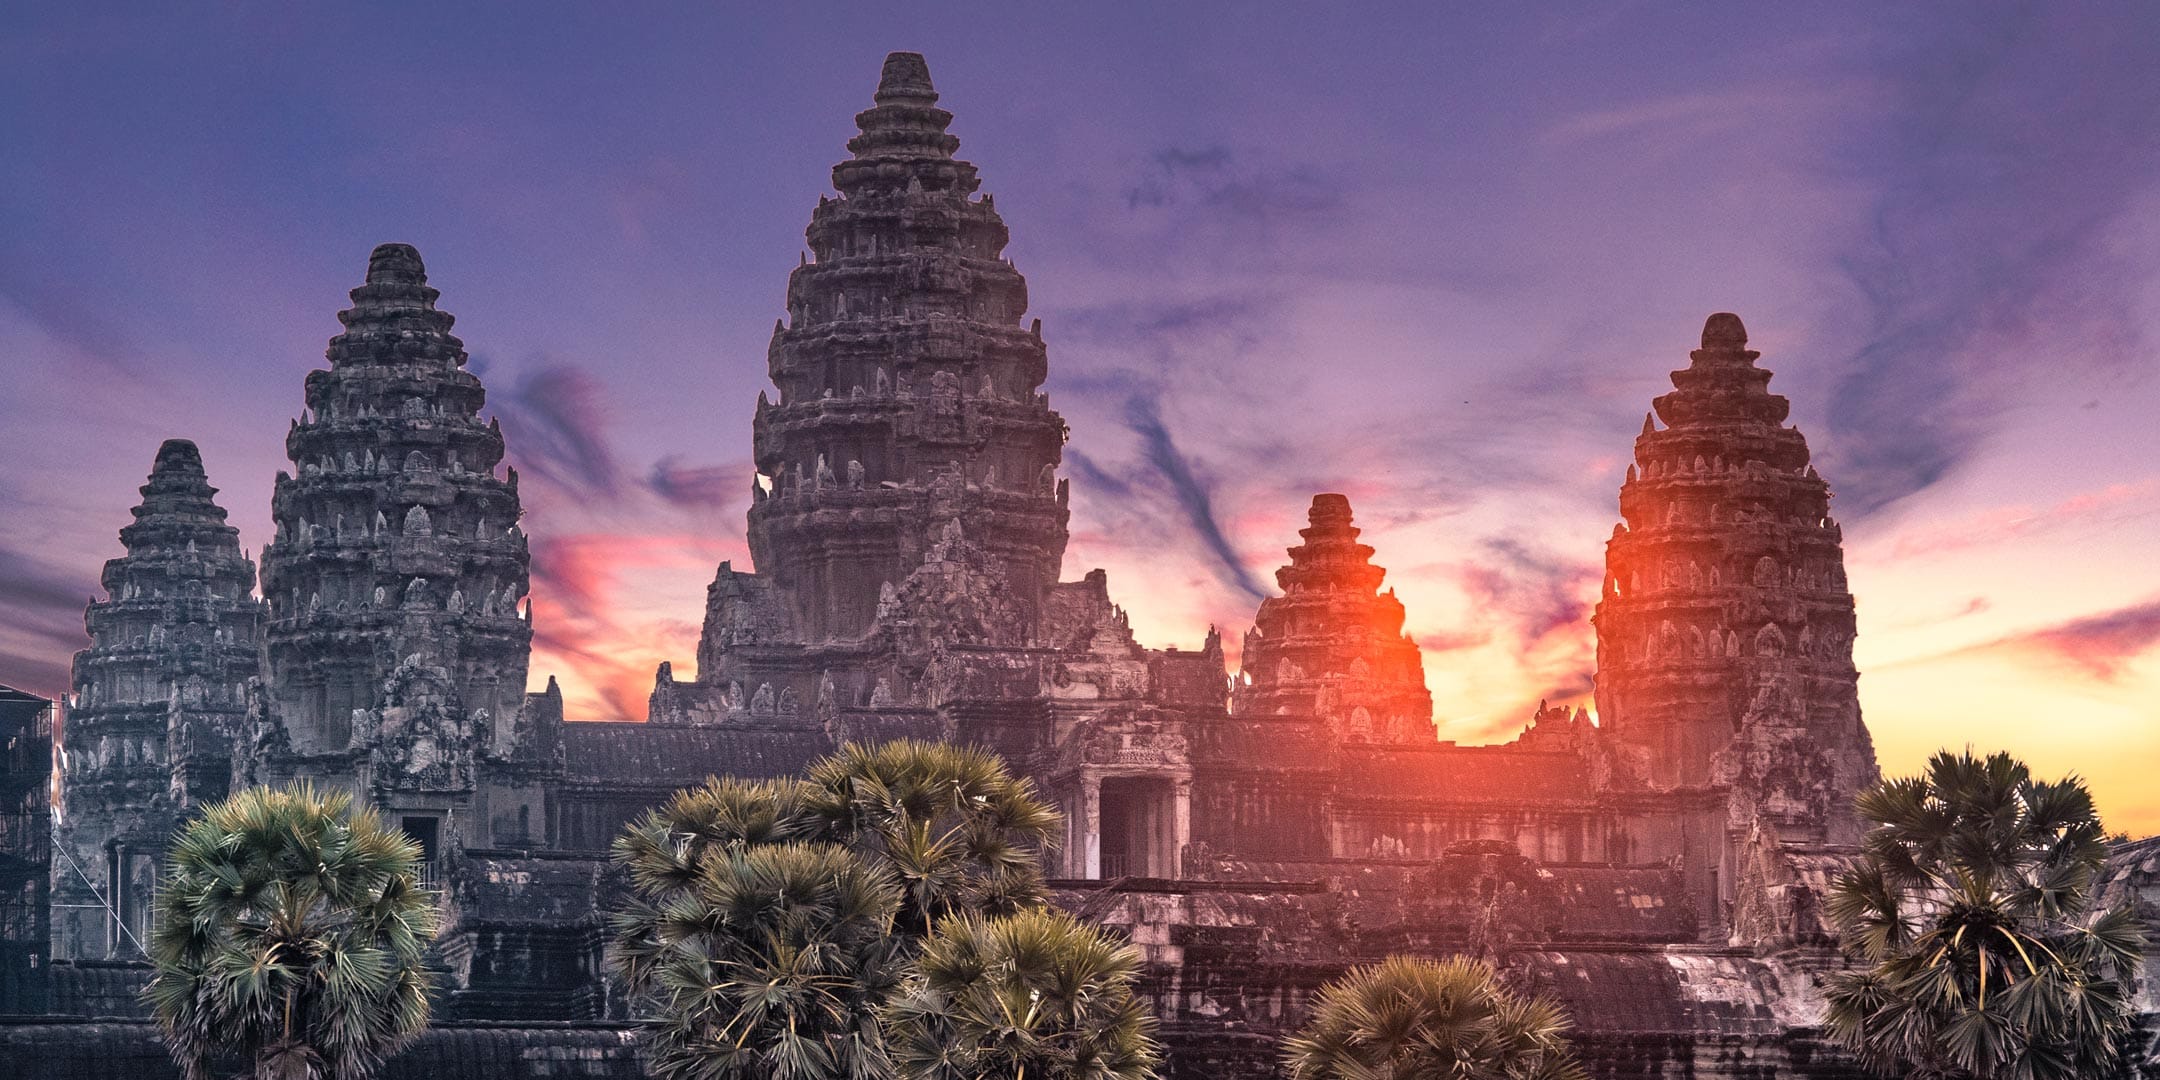 Visiting Angkor Wat - The Ultimate Guide (with a map)